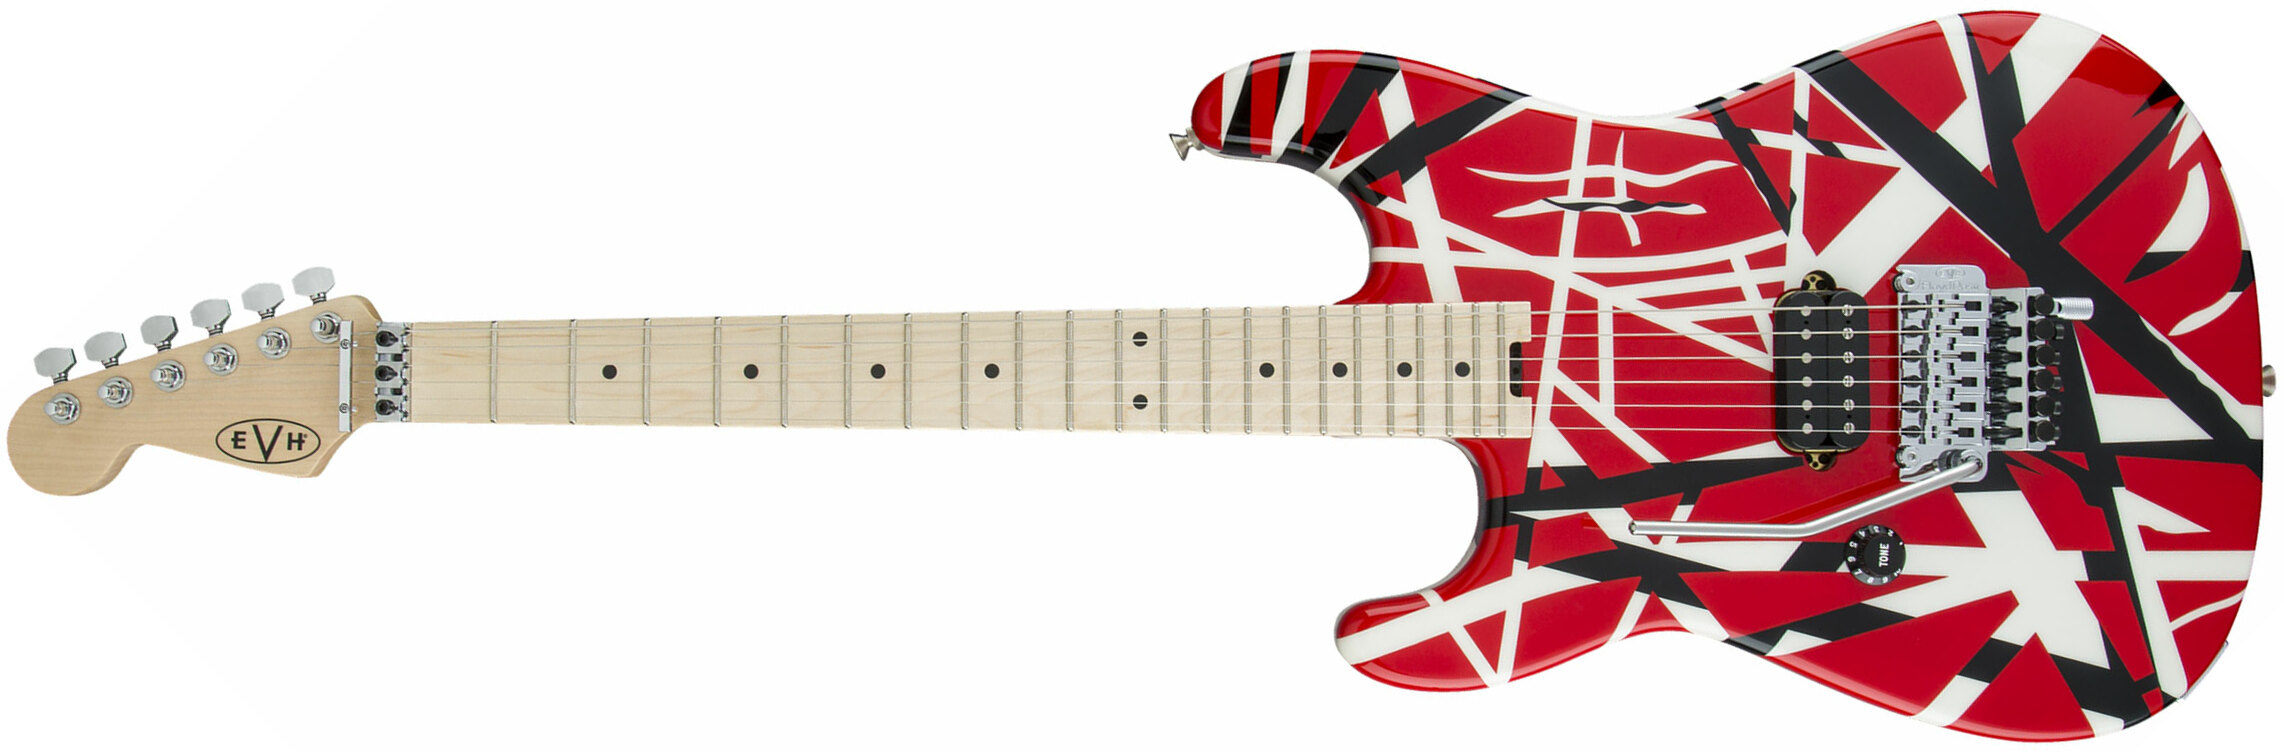 Evh Striped Series Lh Gaucher Signature H Fr Mn - Red Black White Stripes - Left-handed electric guitar - Main picture